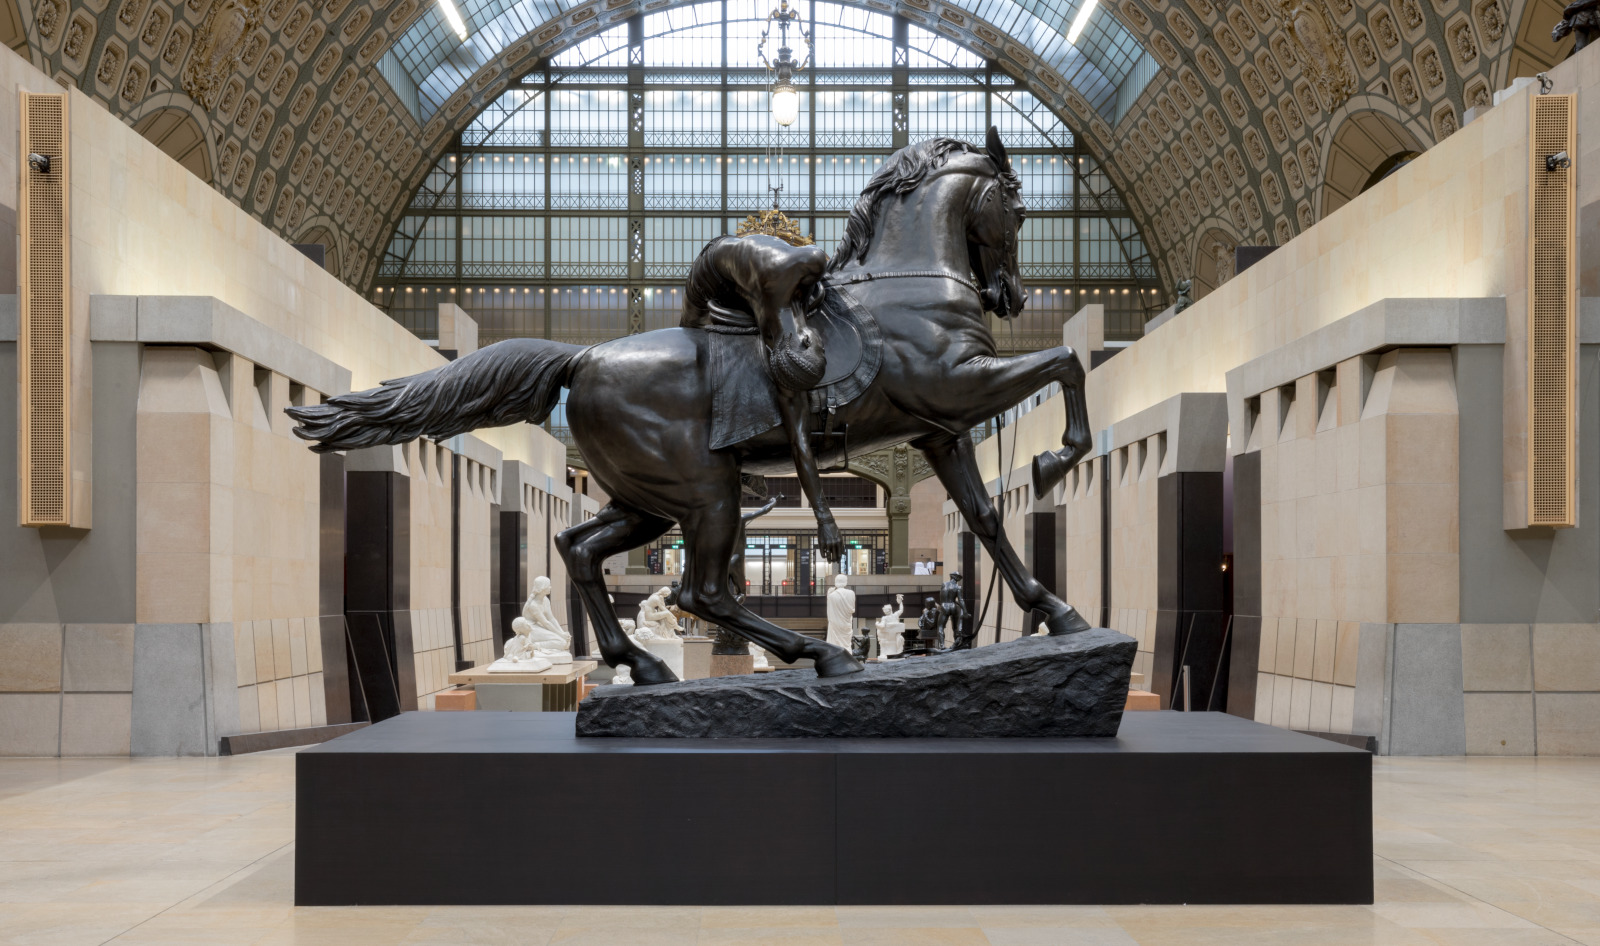 Louis Vuitton takes over Orsay museum for its Paris fashion show - Global  Times